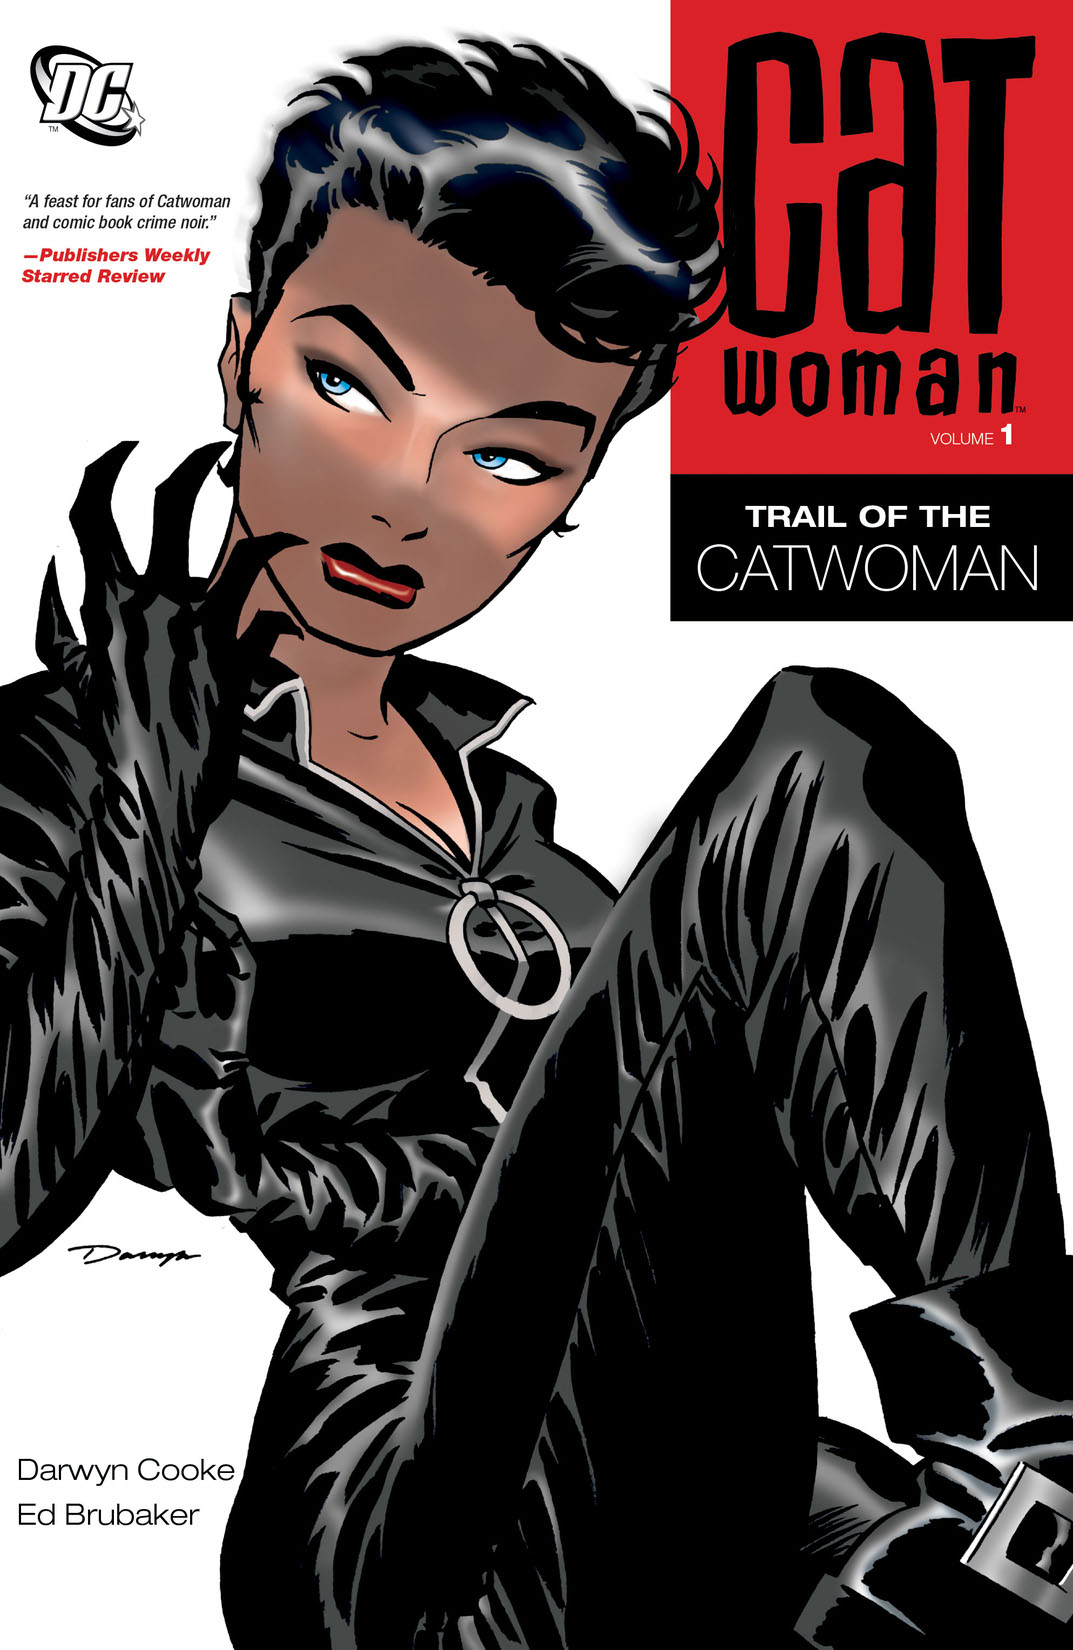 Catwoman Vol. 1: Trail of the Catwoman preview images